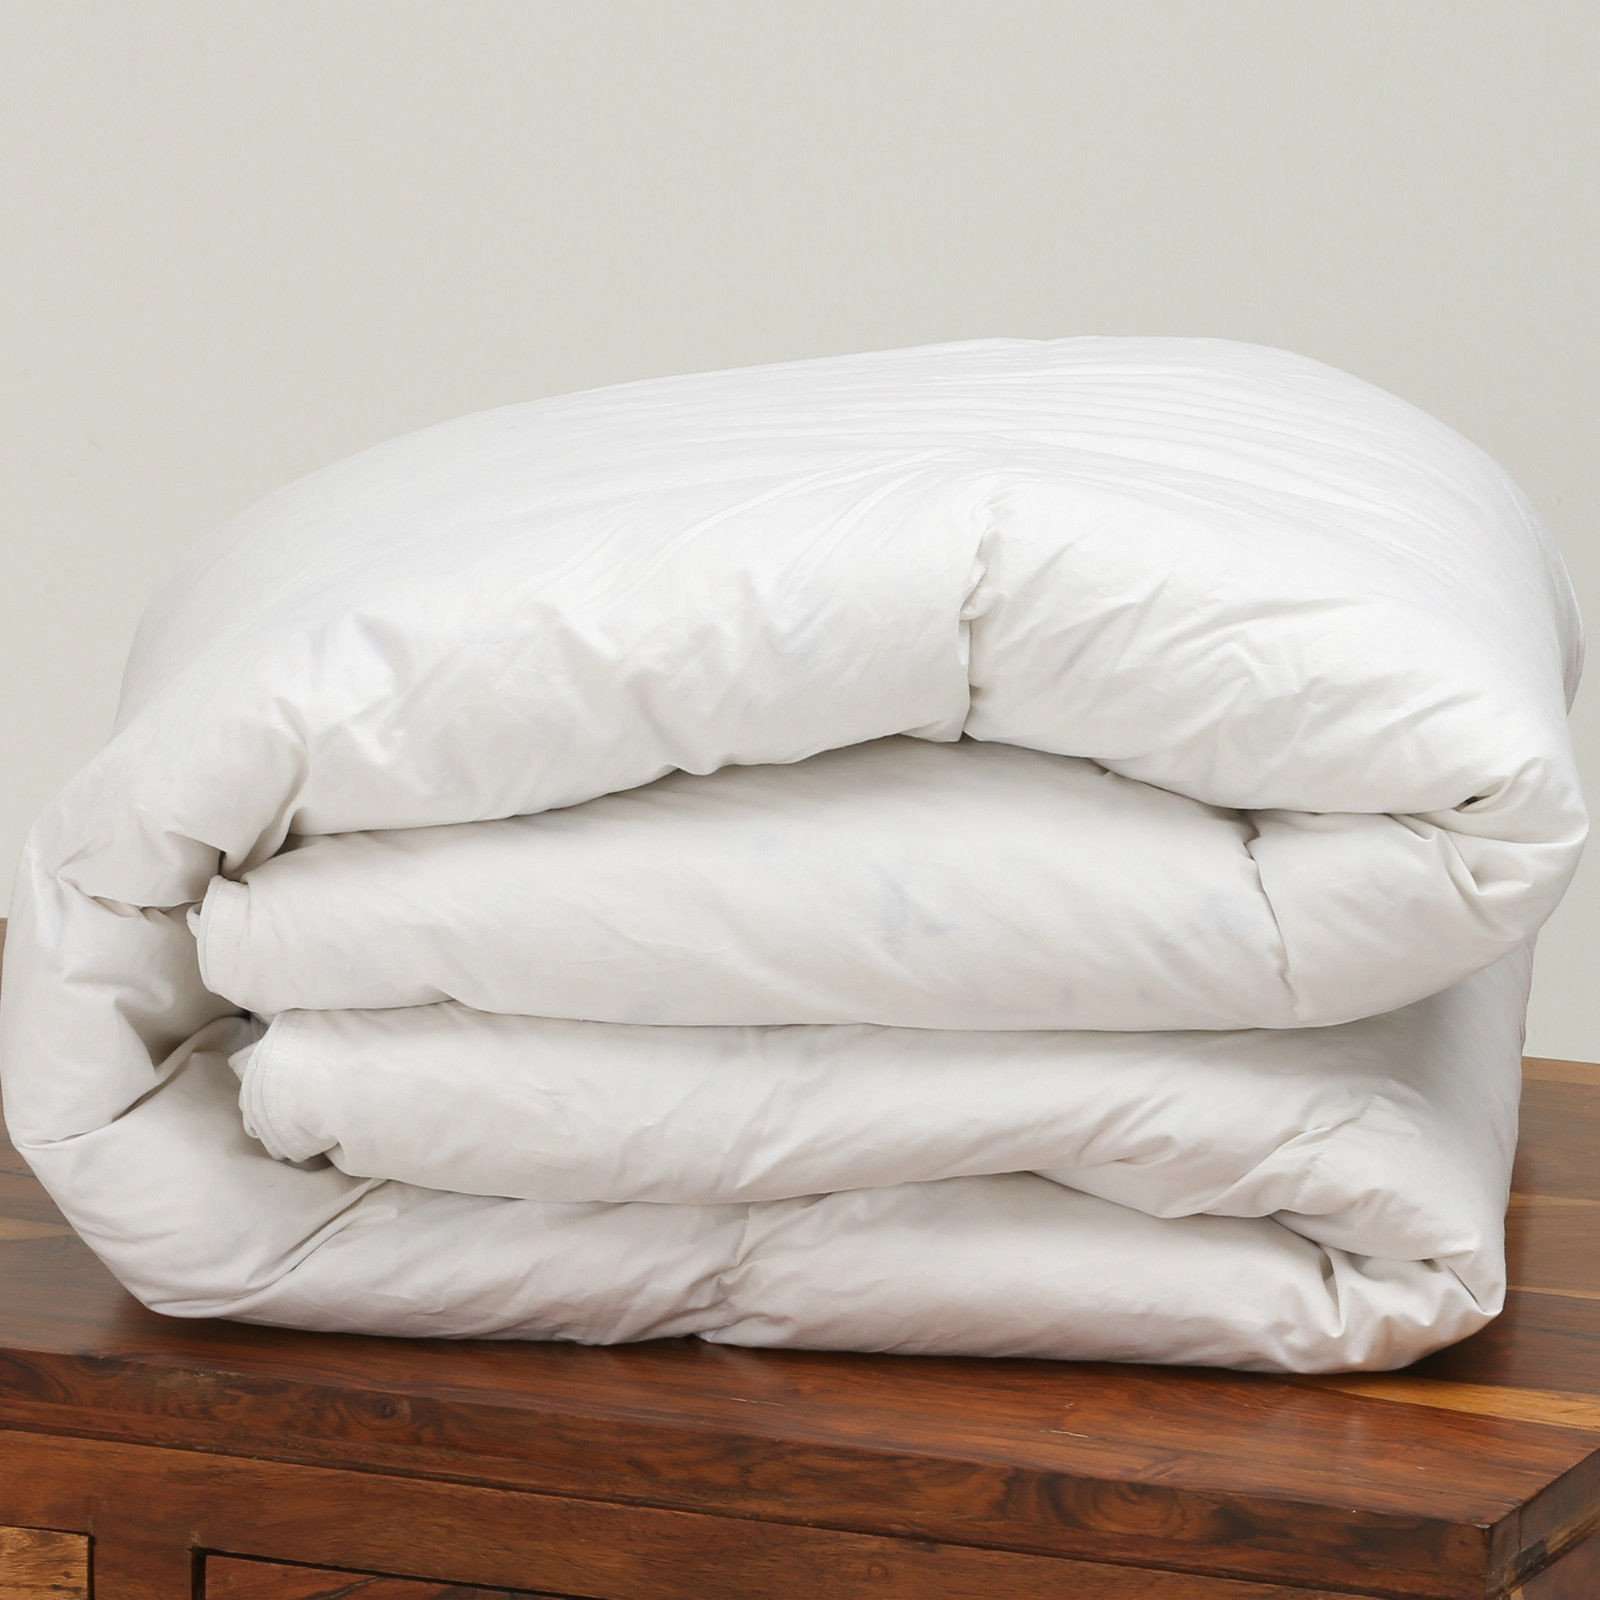 Stay-Warm-and-Comfy-with-the-Super-King-Goose-Duvet